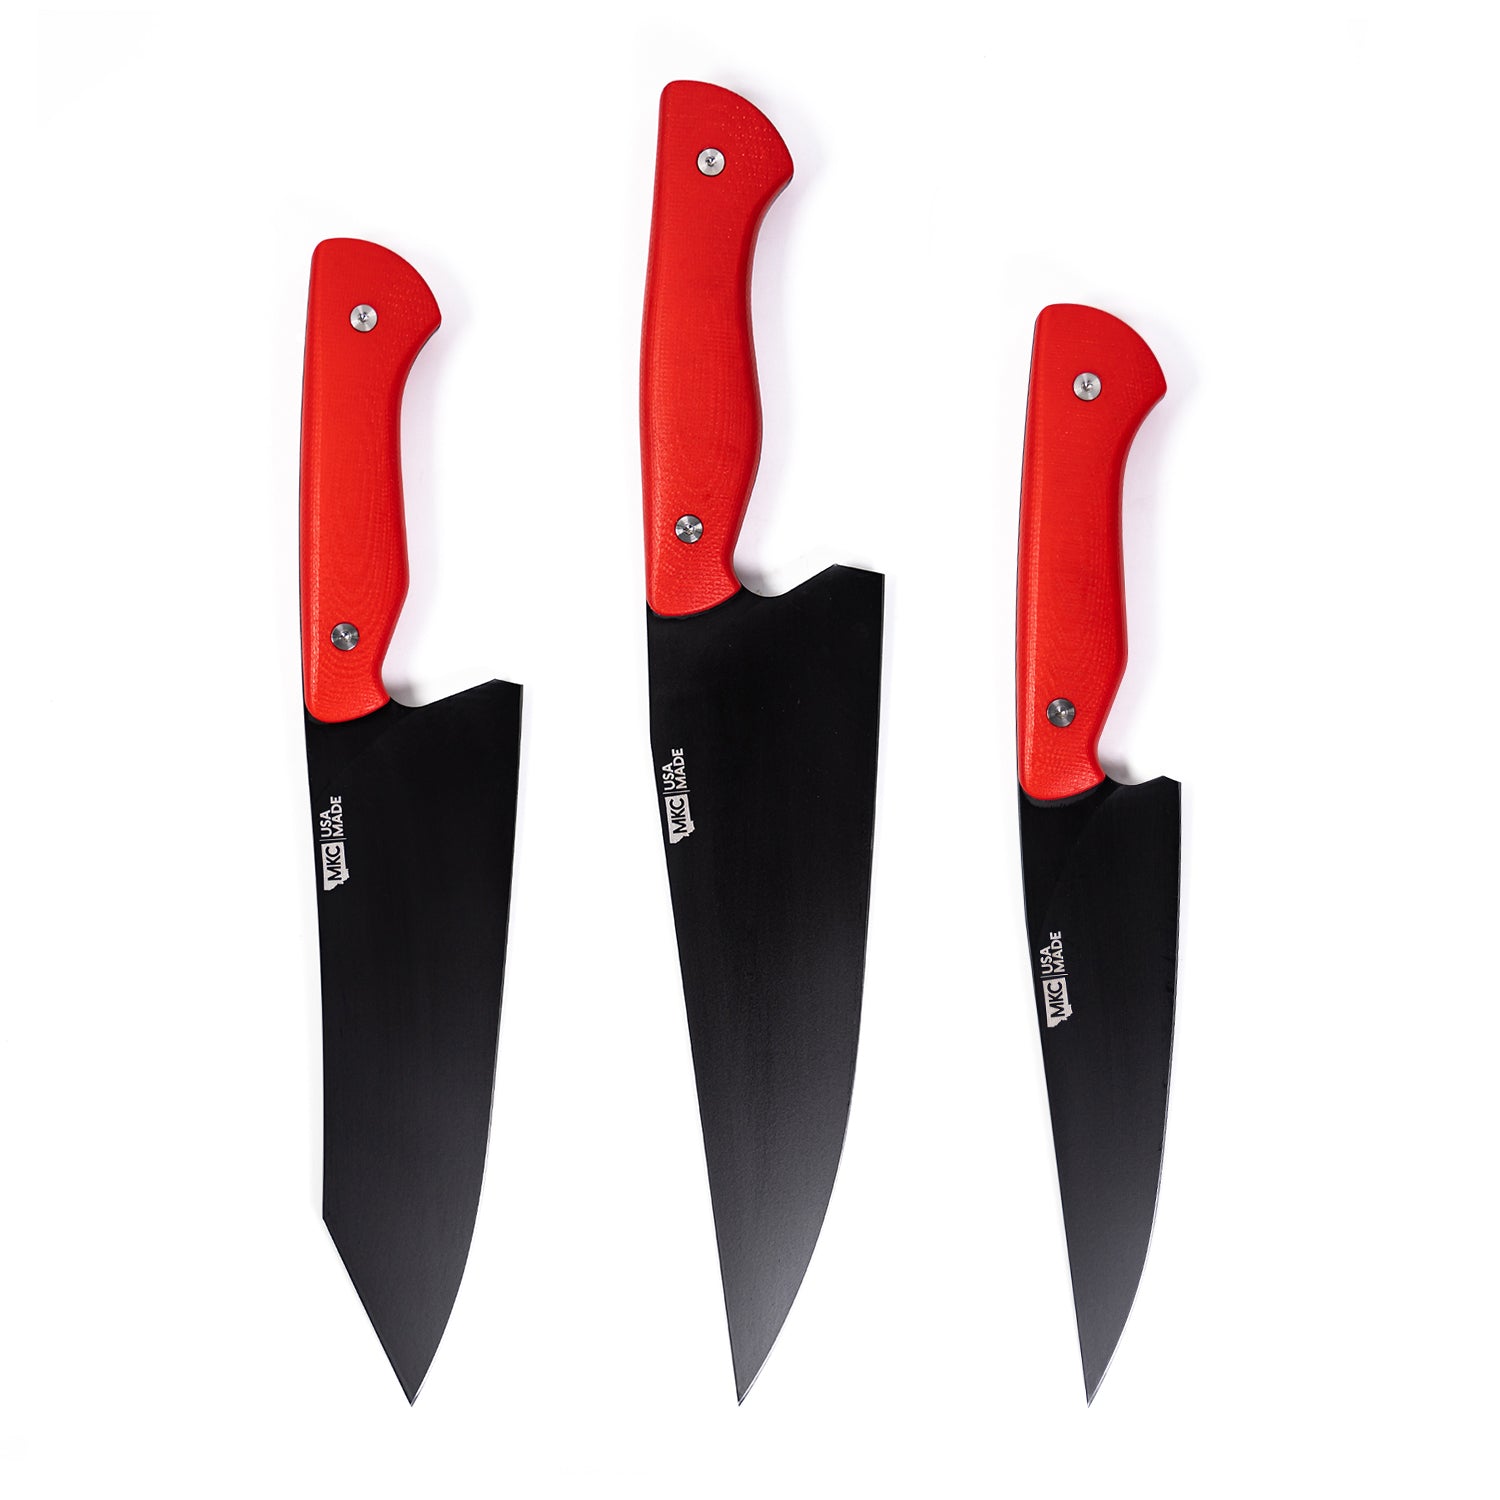 Made In's Restaurant Quality Knives Come in a Brand New Color